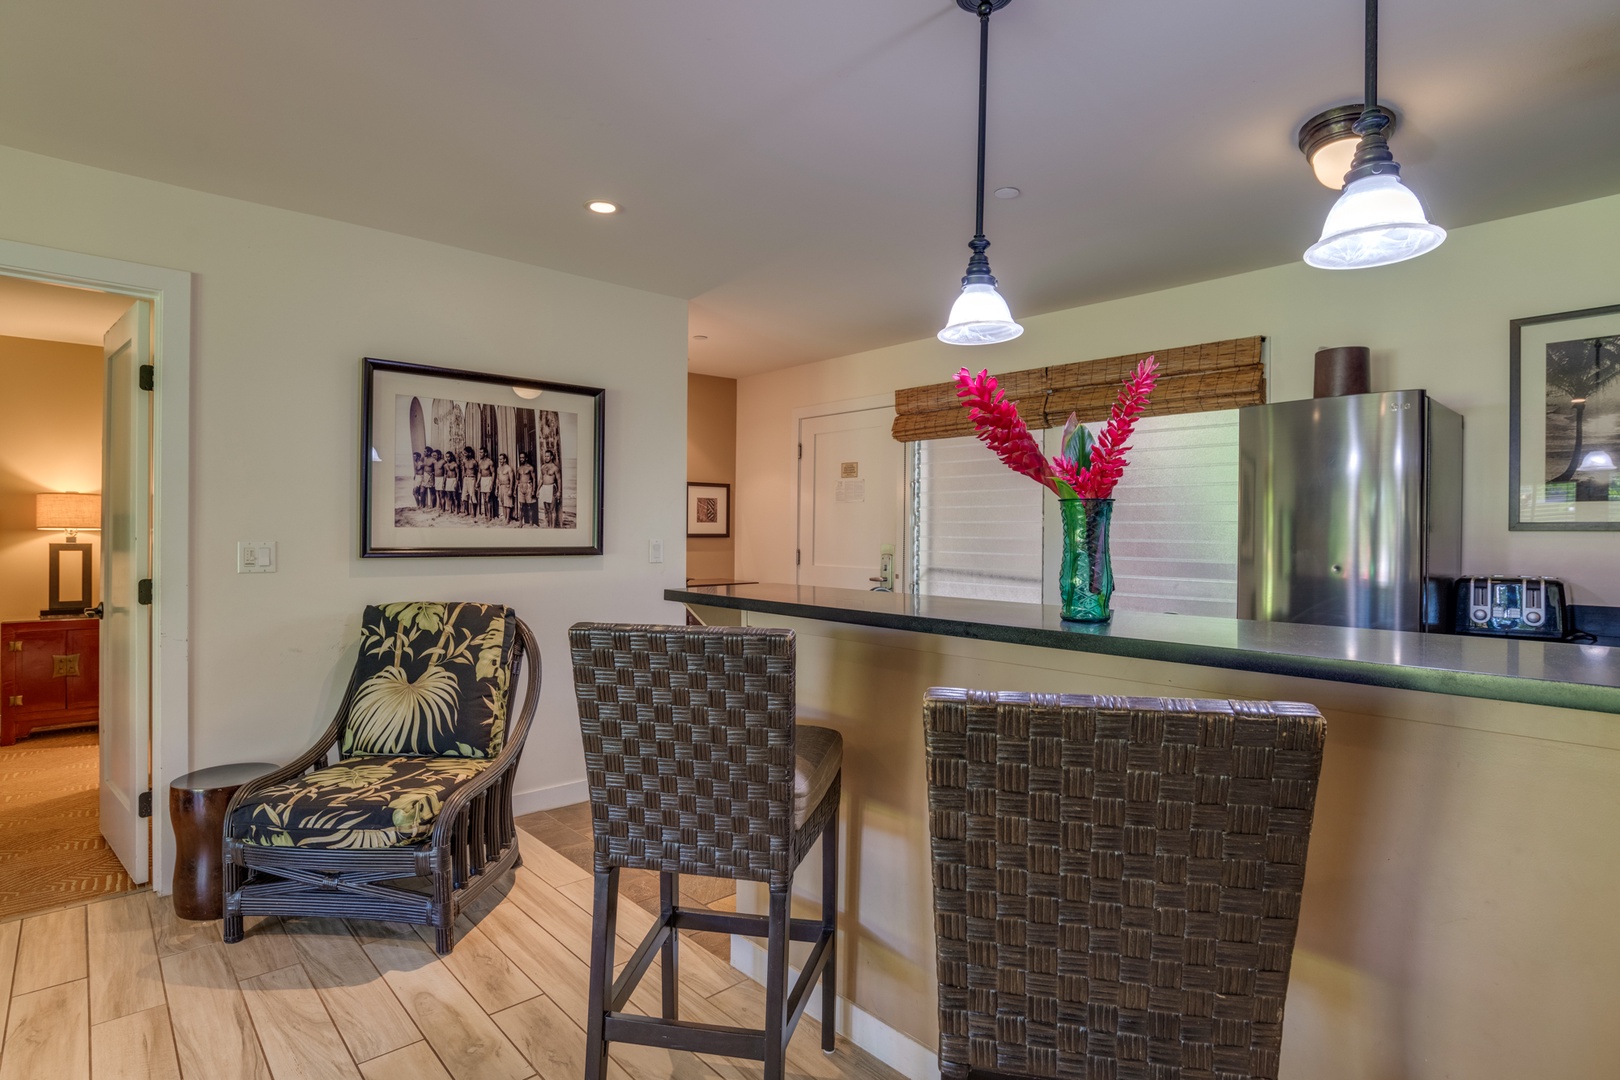 Lahaina Vacation Rentals, Aina Nalu D103 - The kitchen has breakfast bar seating for 2